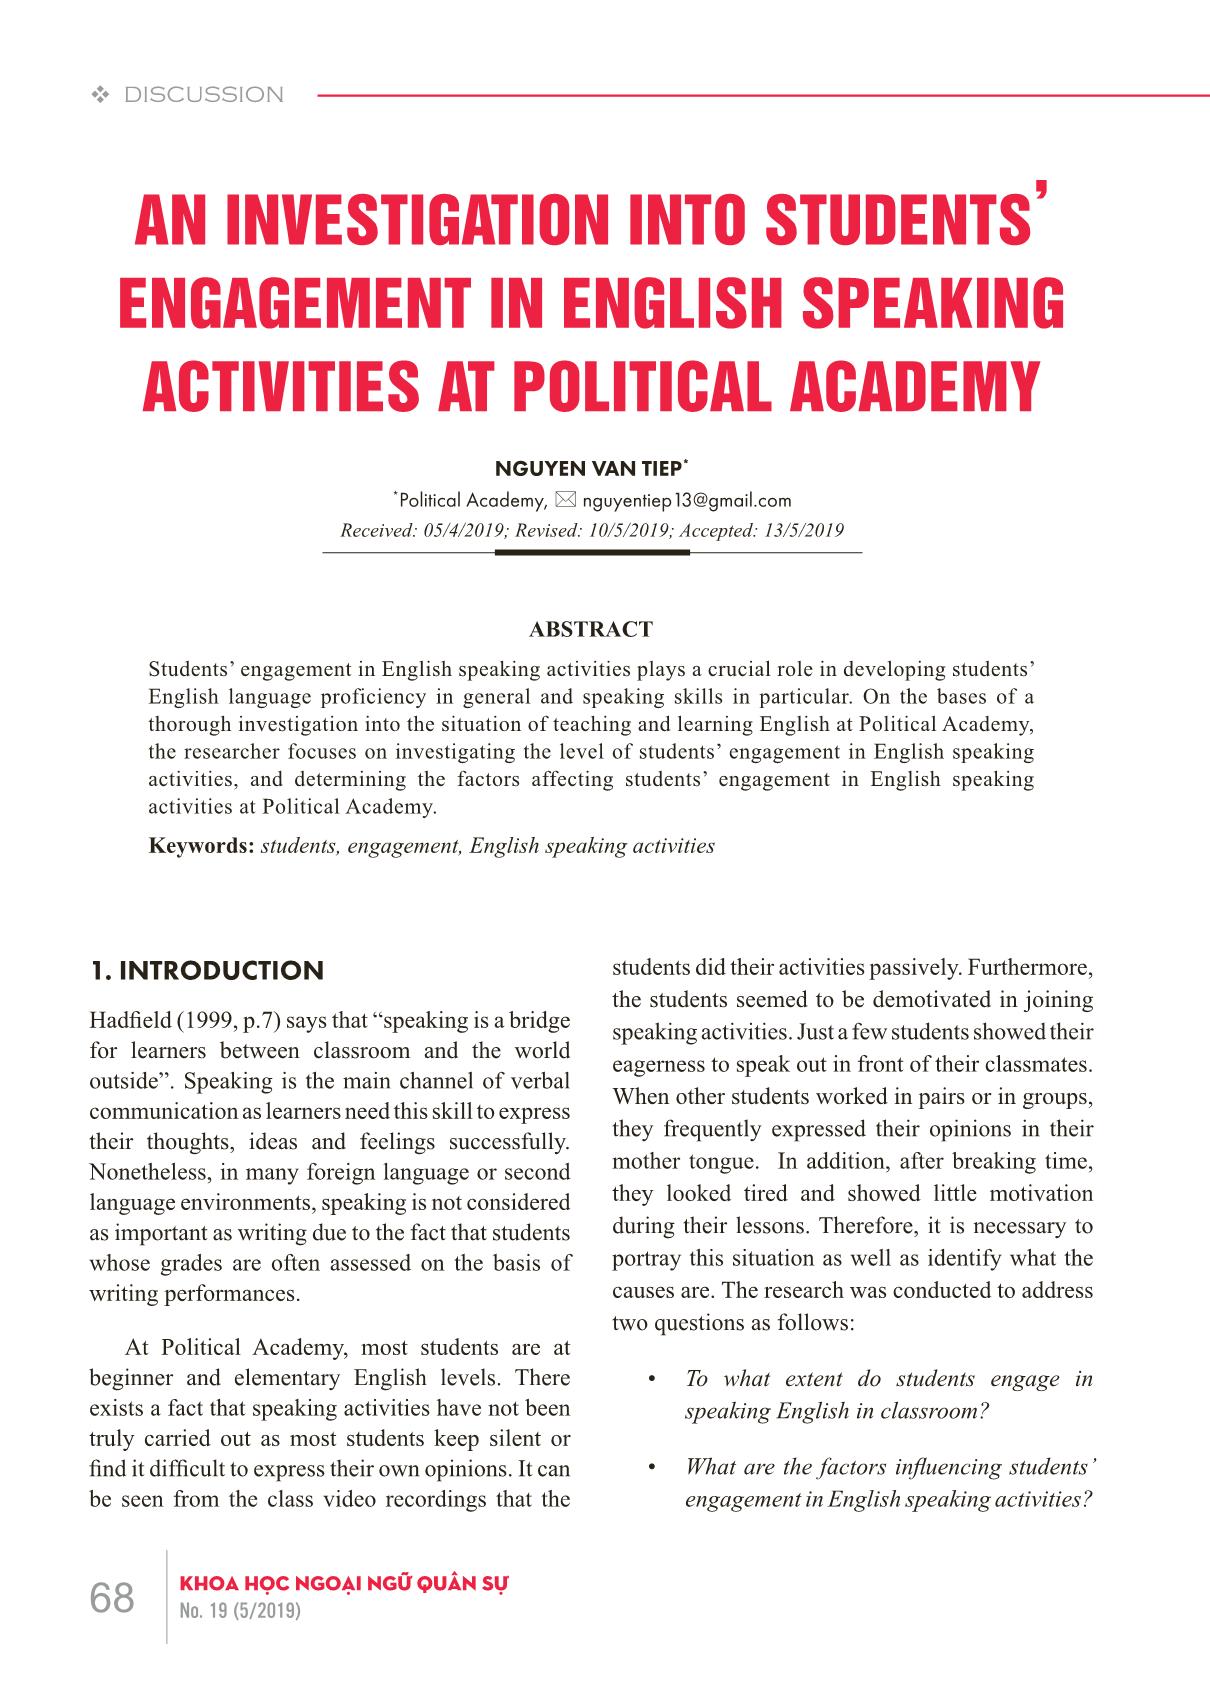 An investigation into students’ engagement in English speaking activities at political academy trang 1